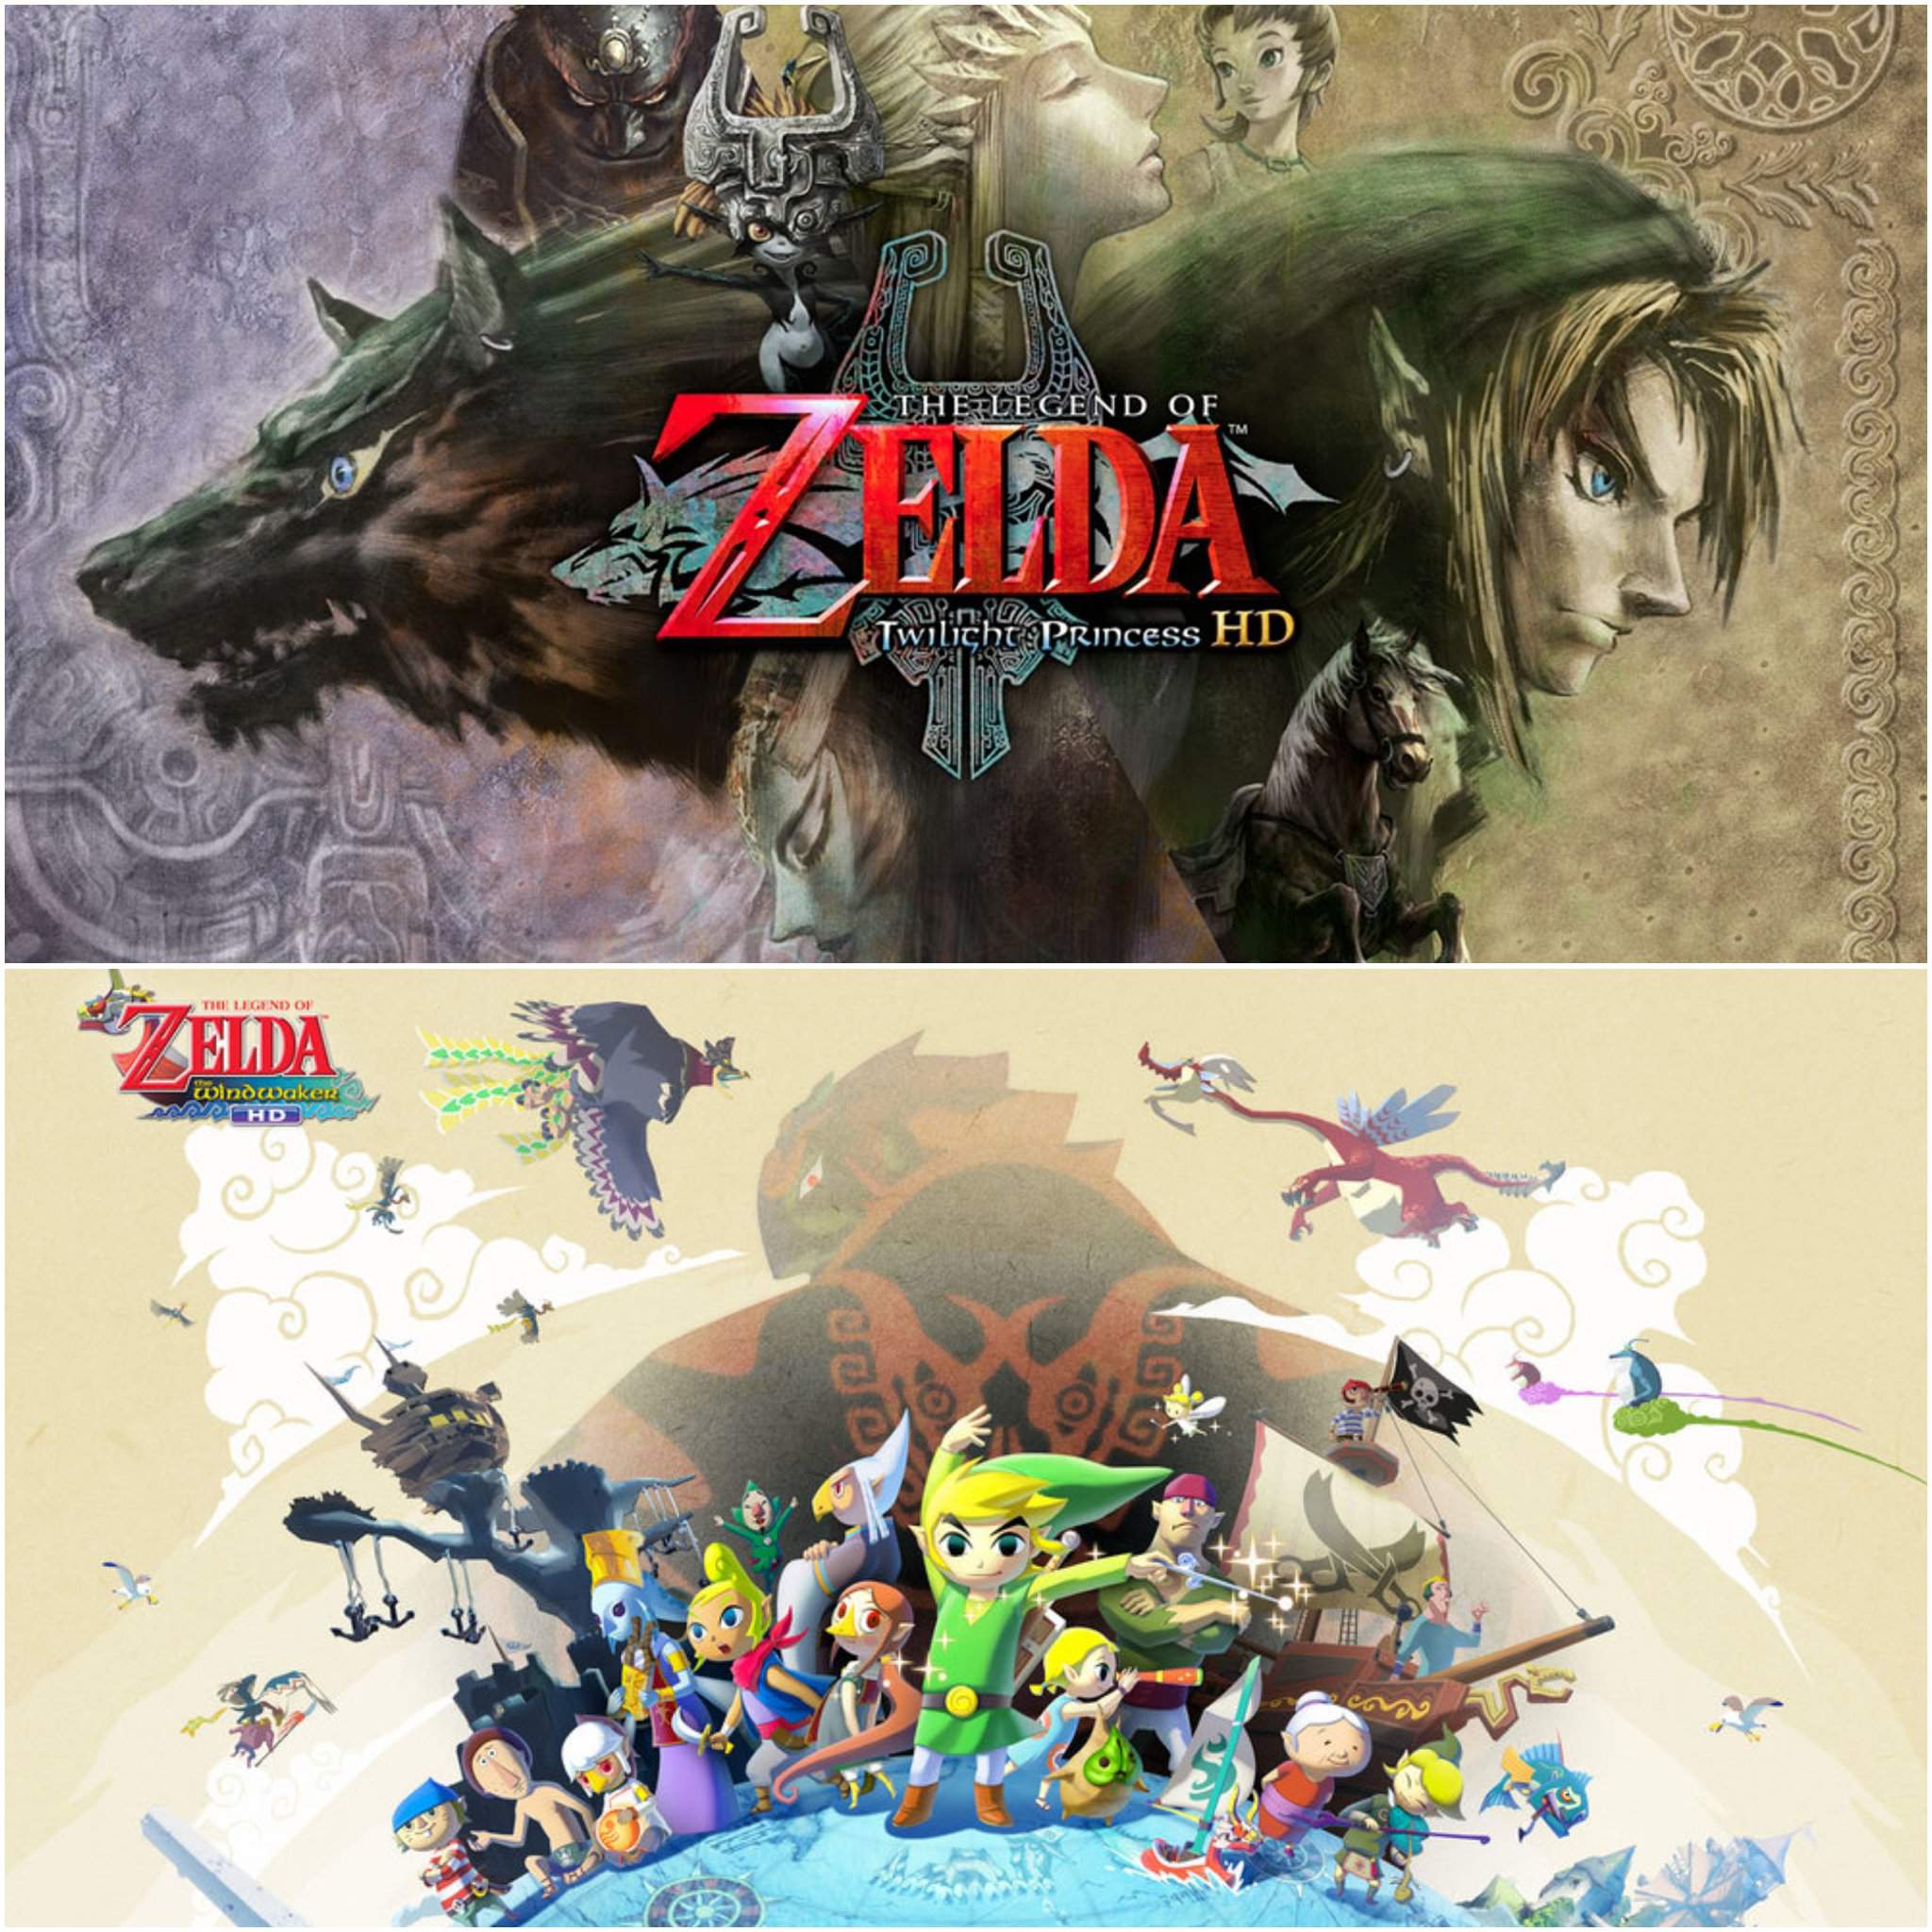 is twilight princess coming to the switch